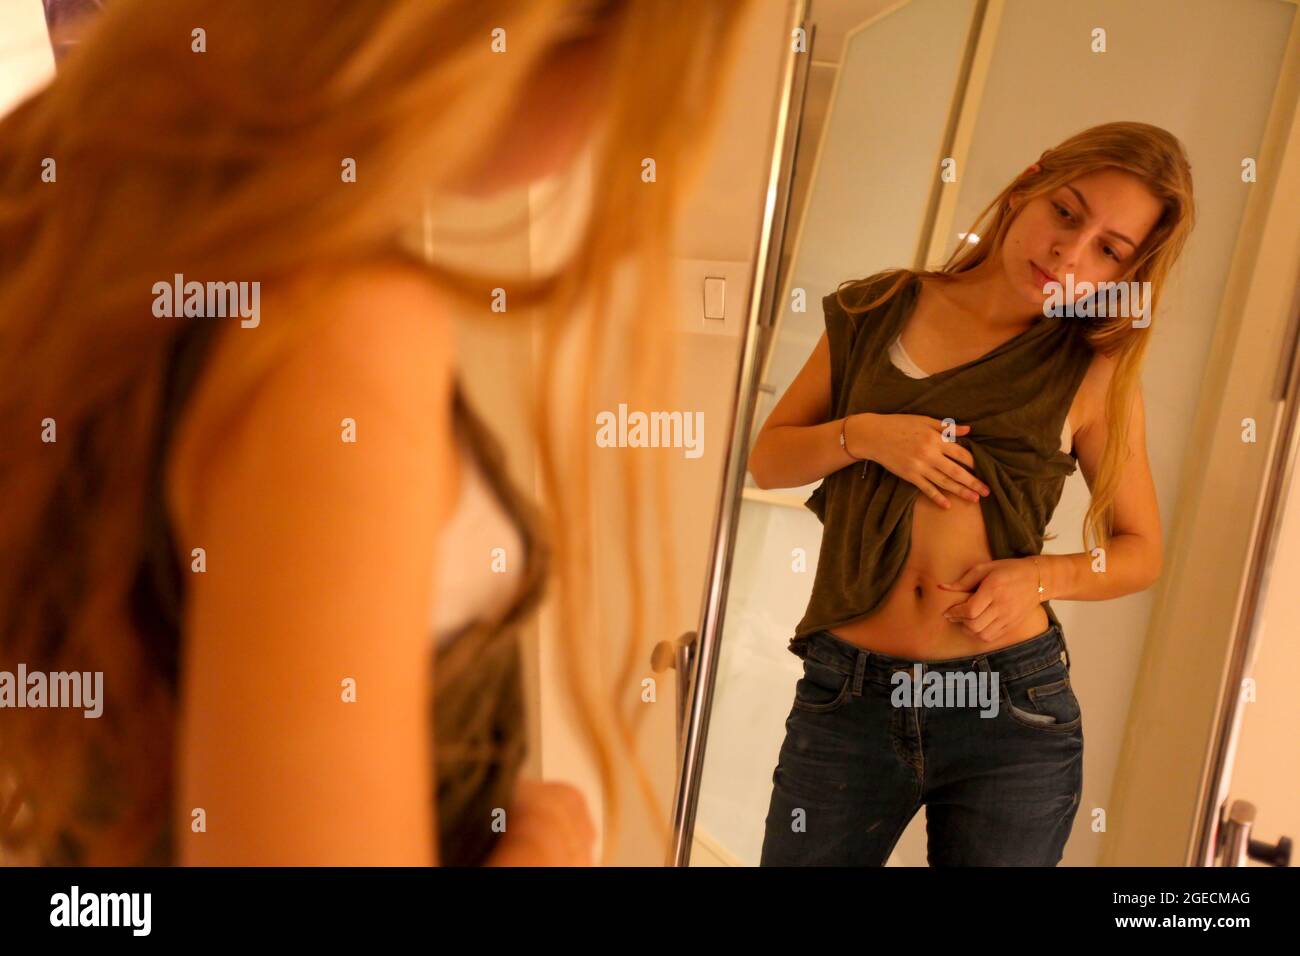 Young Woman pinching her waist. She may be keeping track of weight loss during a diet but compulsive body analysis may be a symptom of a body image di Stock Photo